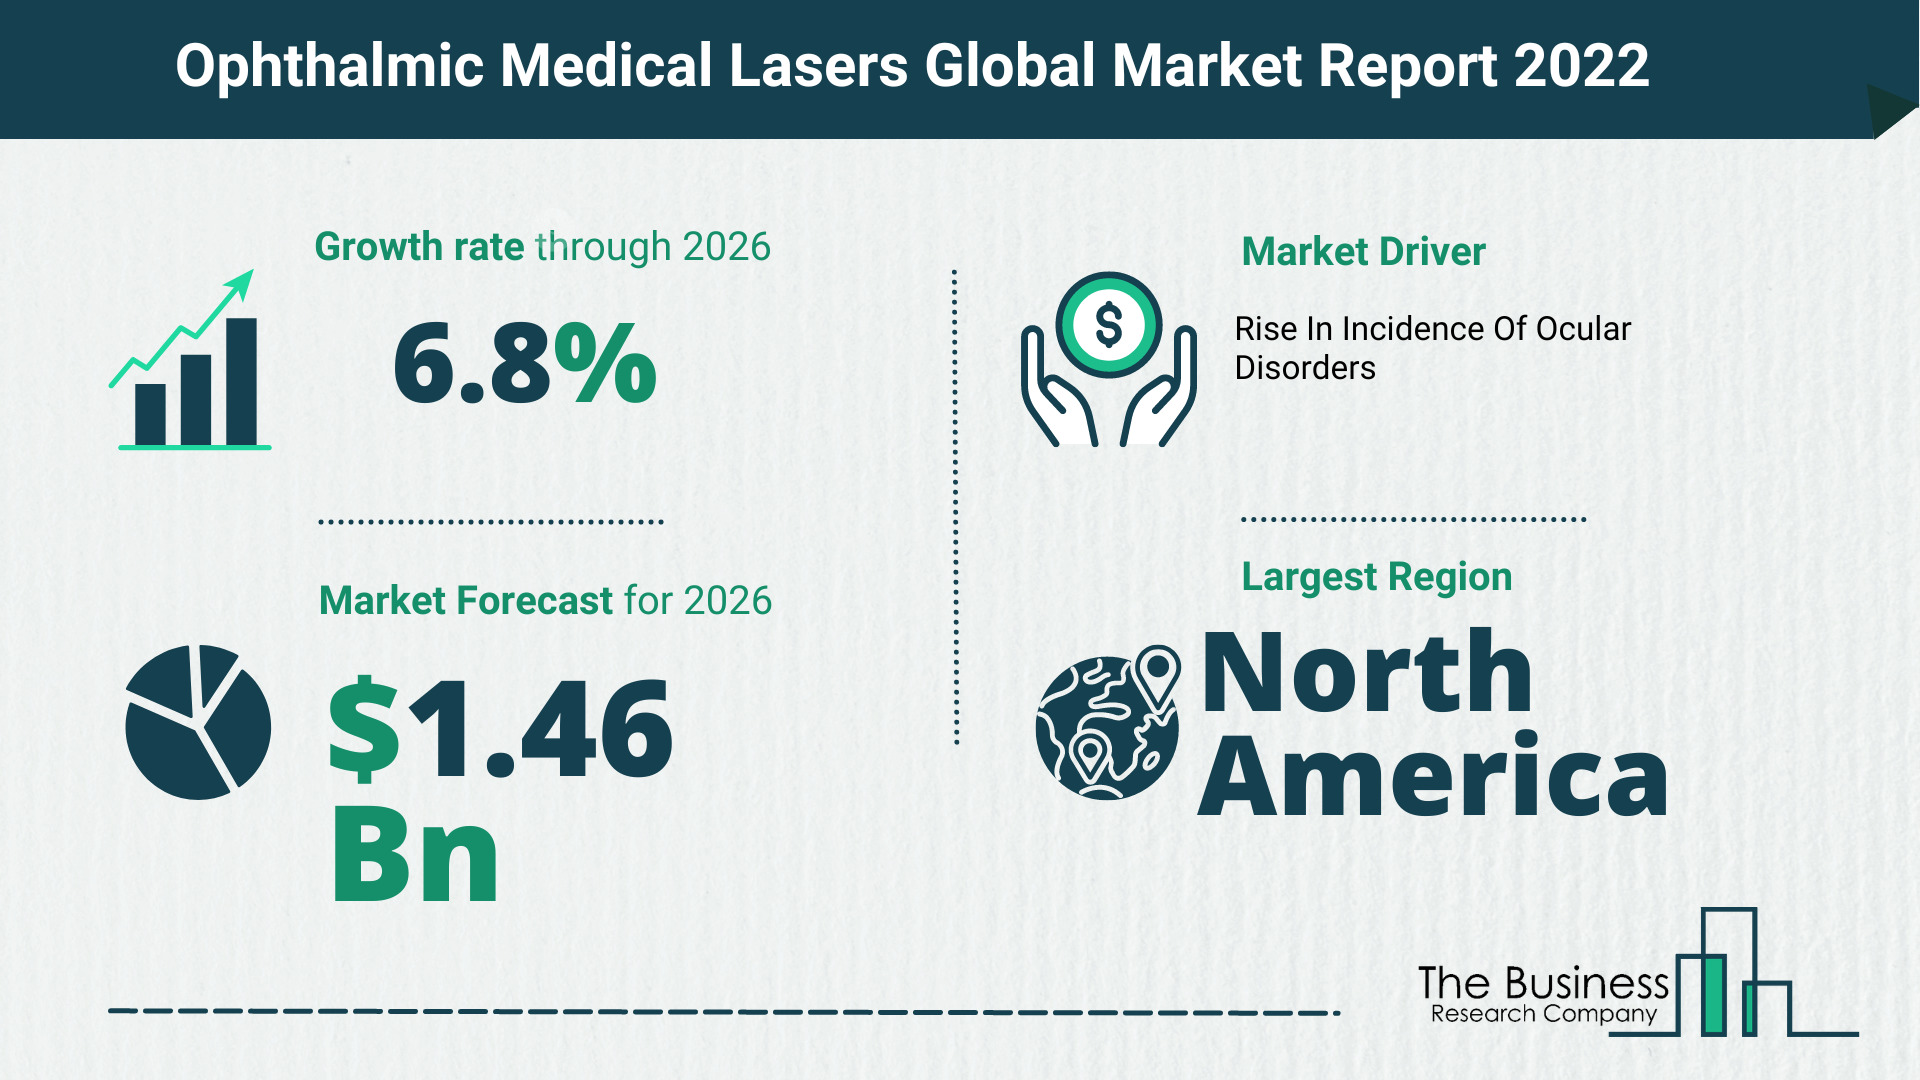 How Will The Ophthalmic Medical Lasers Market Grow In 2022?